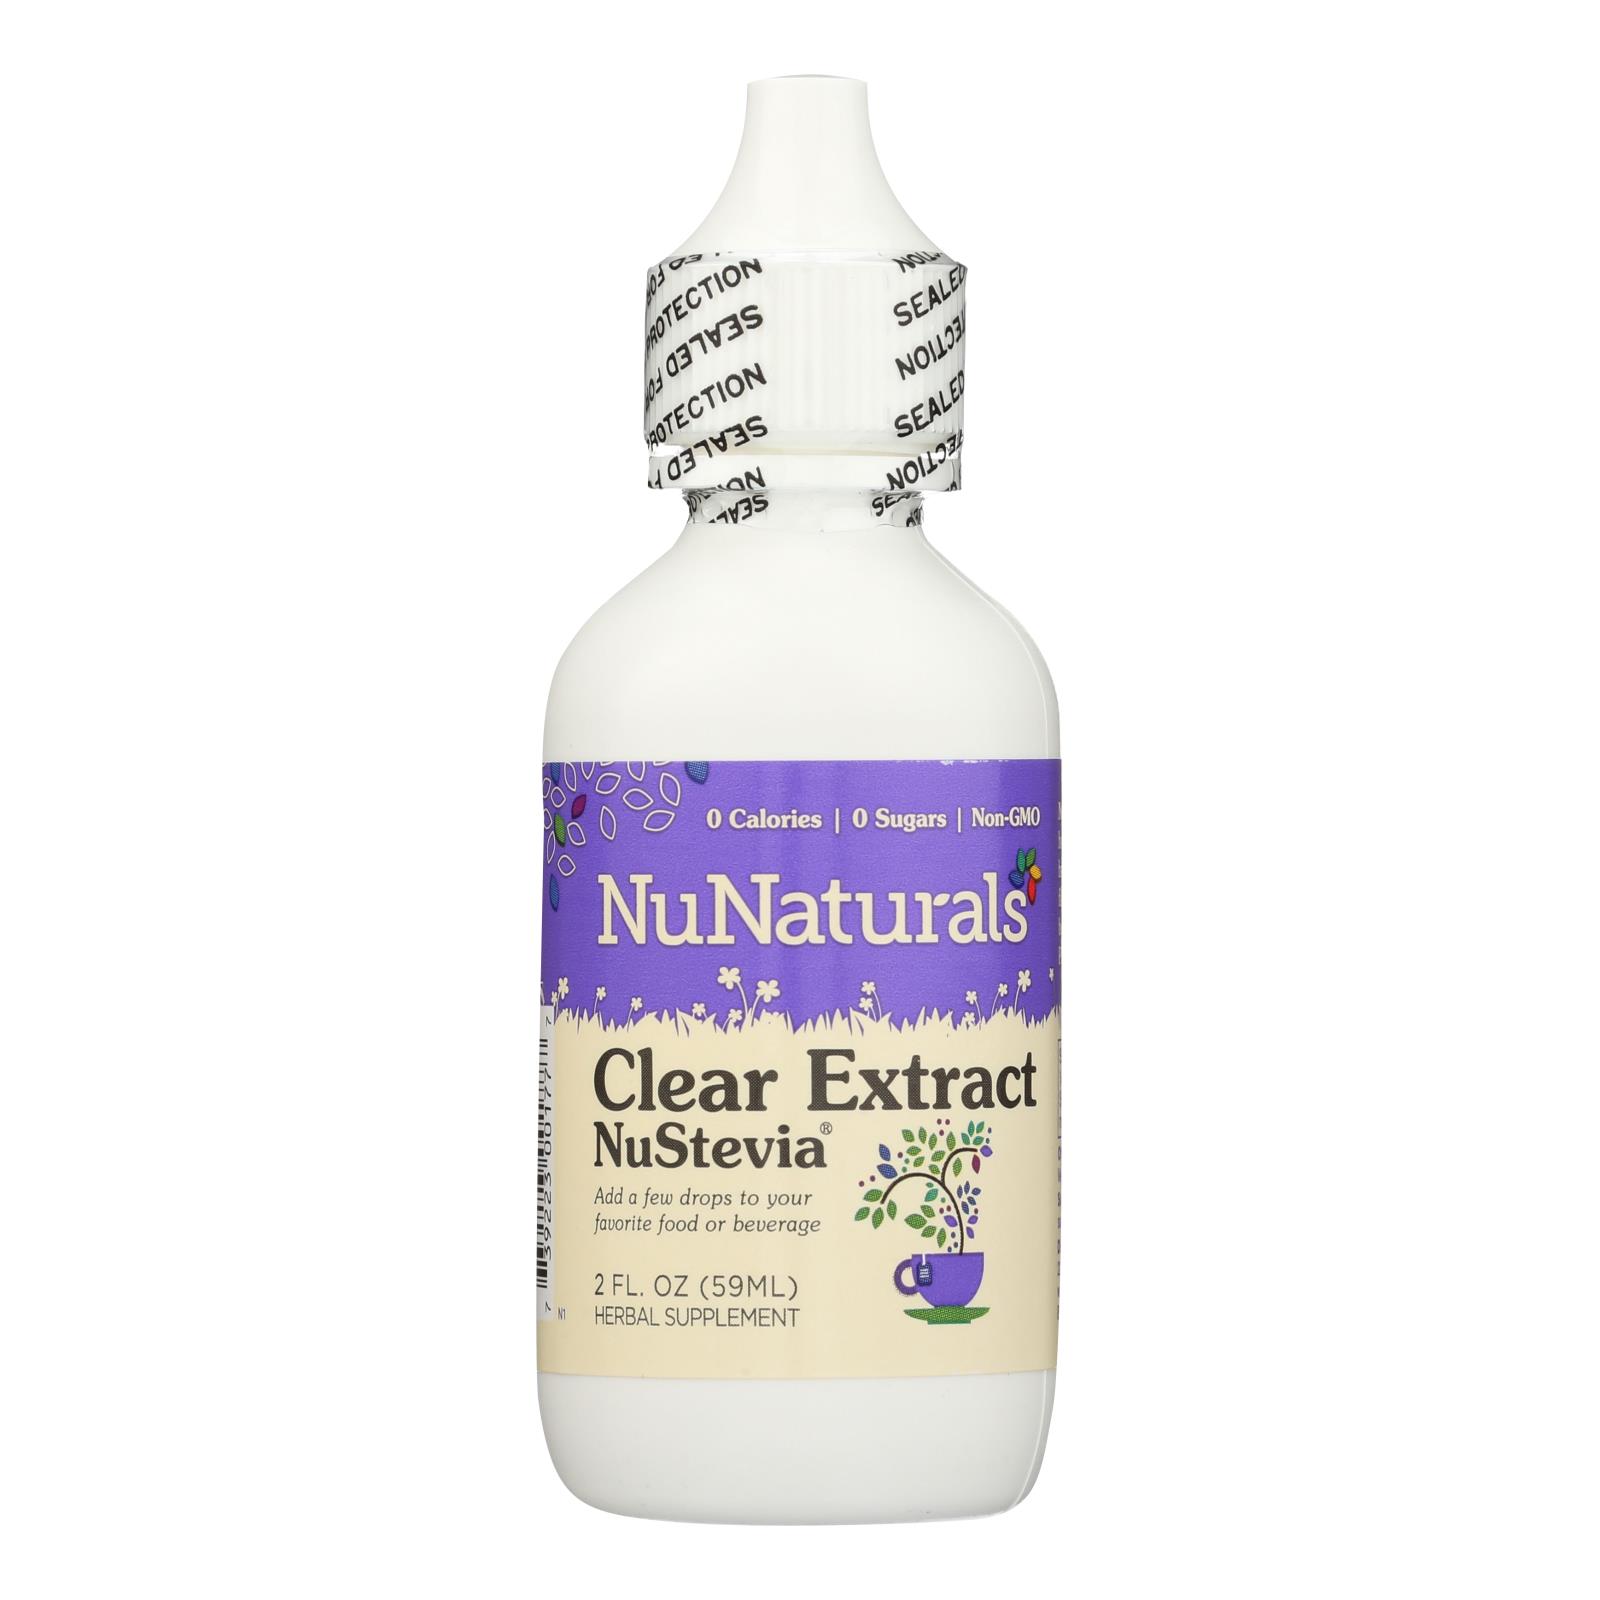 Nunaturals Nustevia Clear Extract Herbal Supplement - 1 Each - 2 OZ